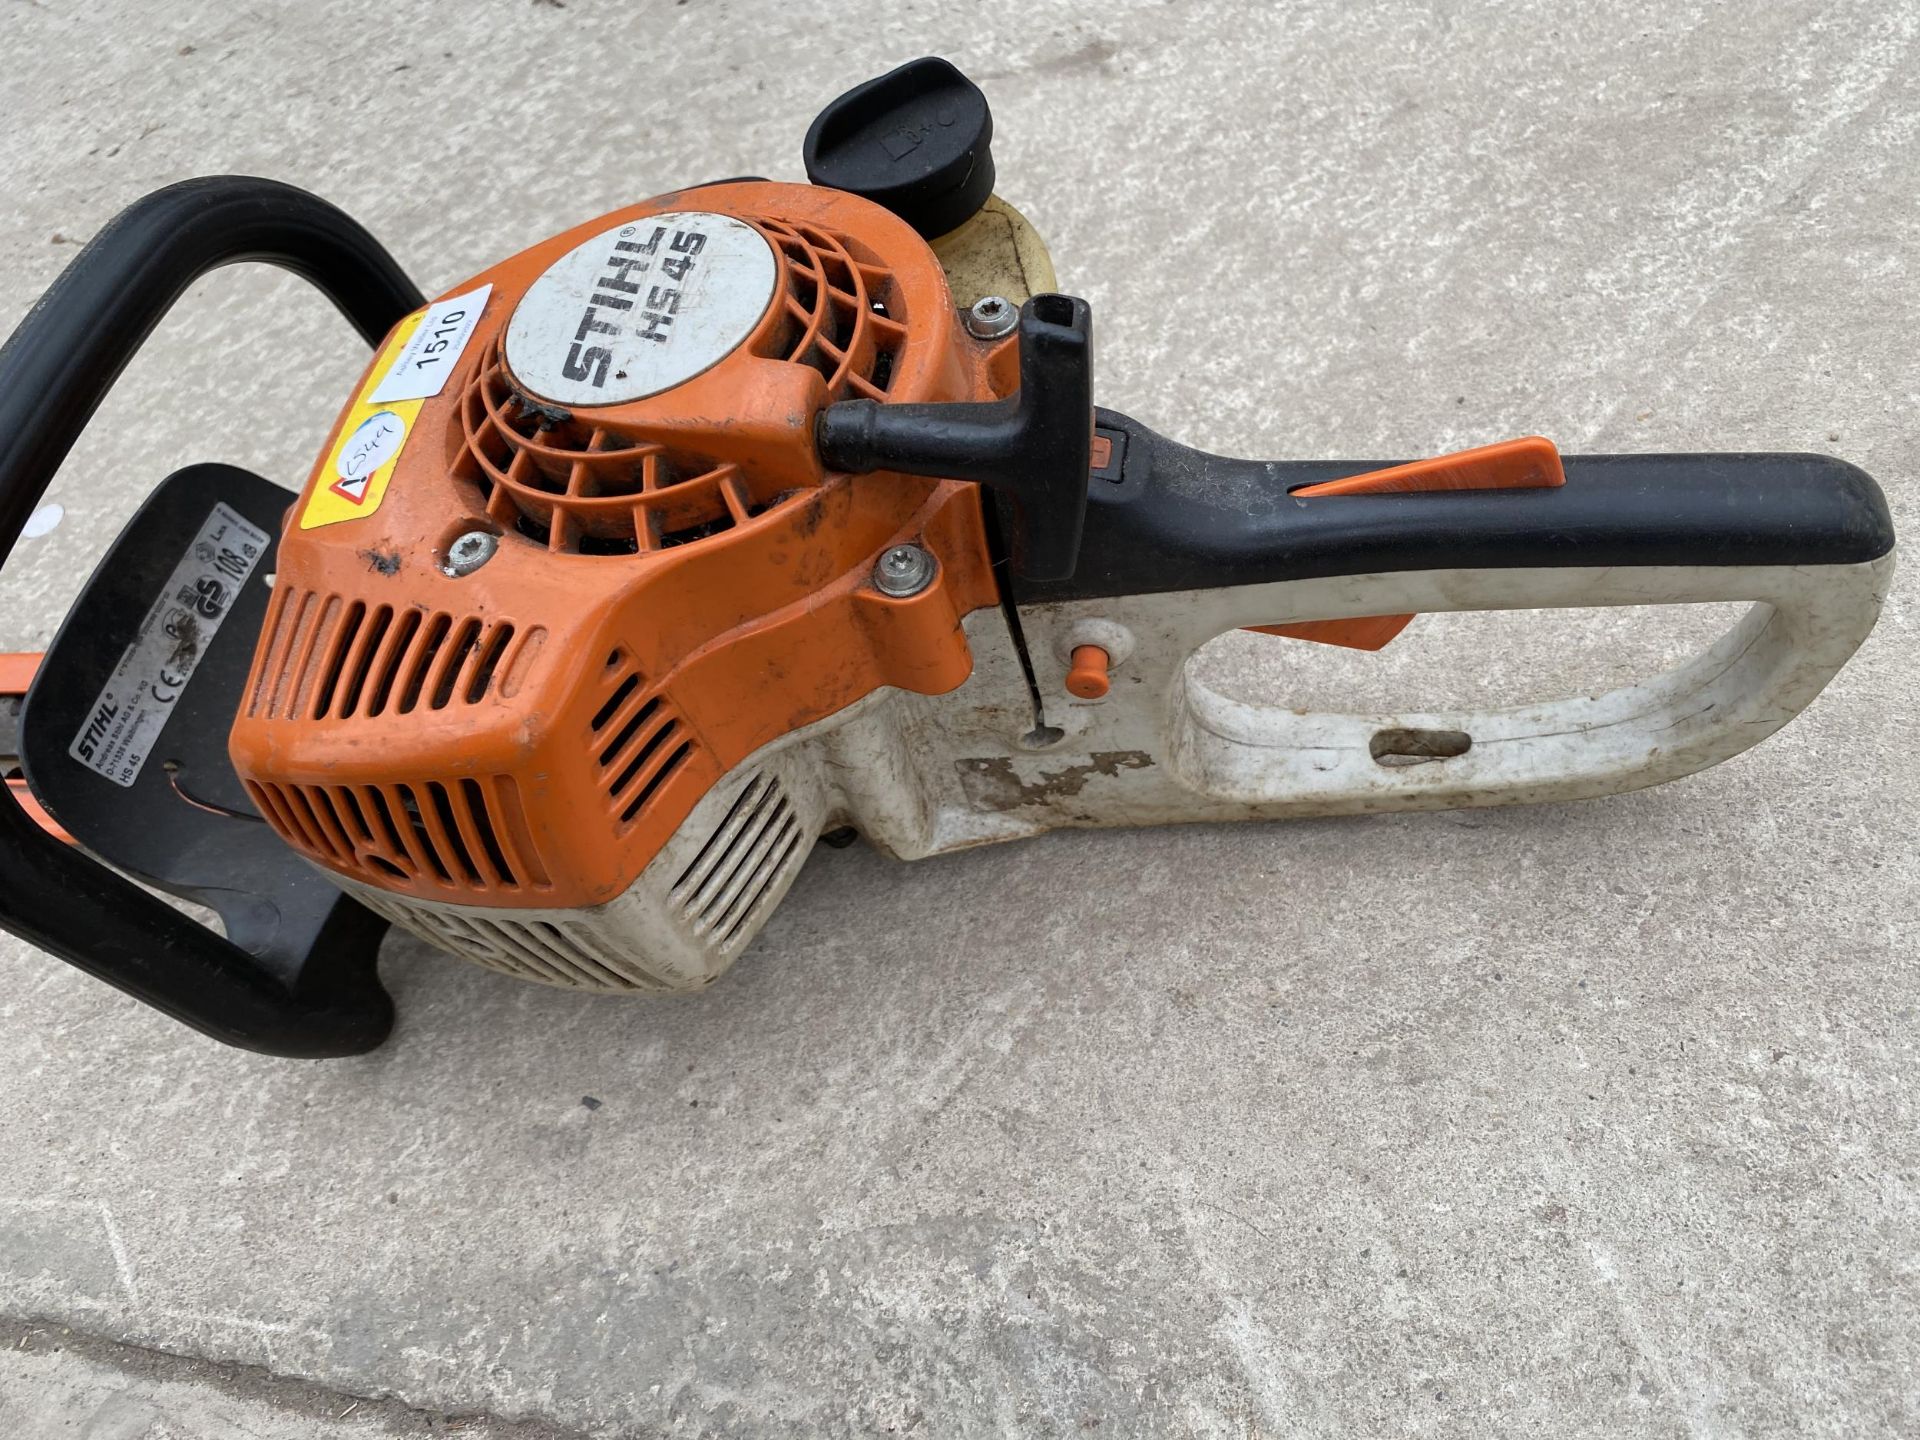 A STIHL HS45 PETROL HEDGE TRIMMER - Image 4 of 4